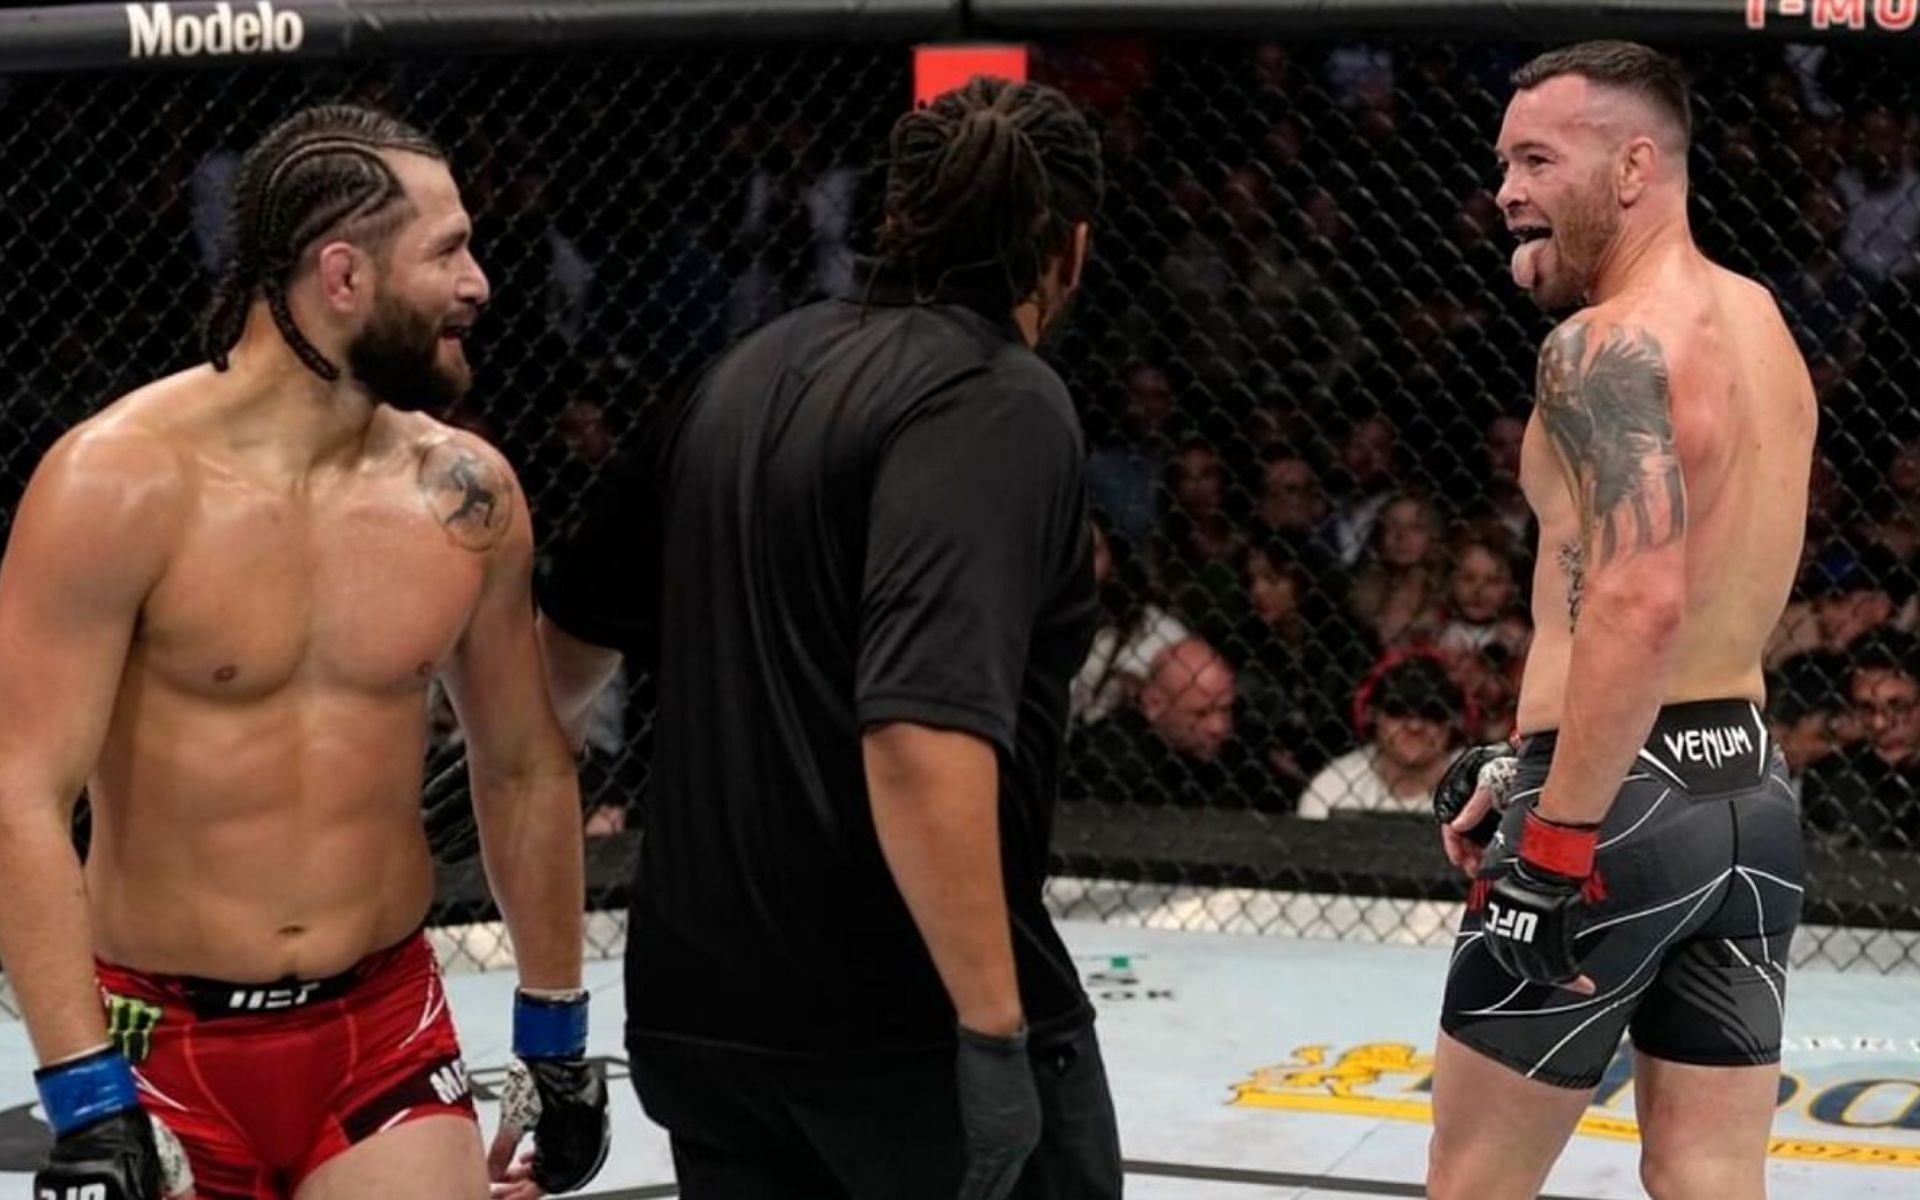 Despite their recent five-round battle, it appears that the feud between Jorge Masvidal and Colby Covington is far from over